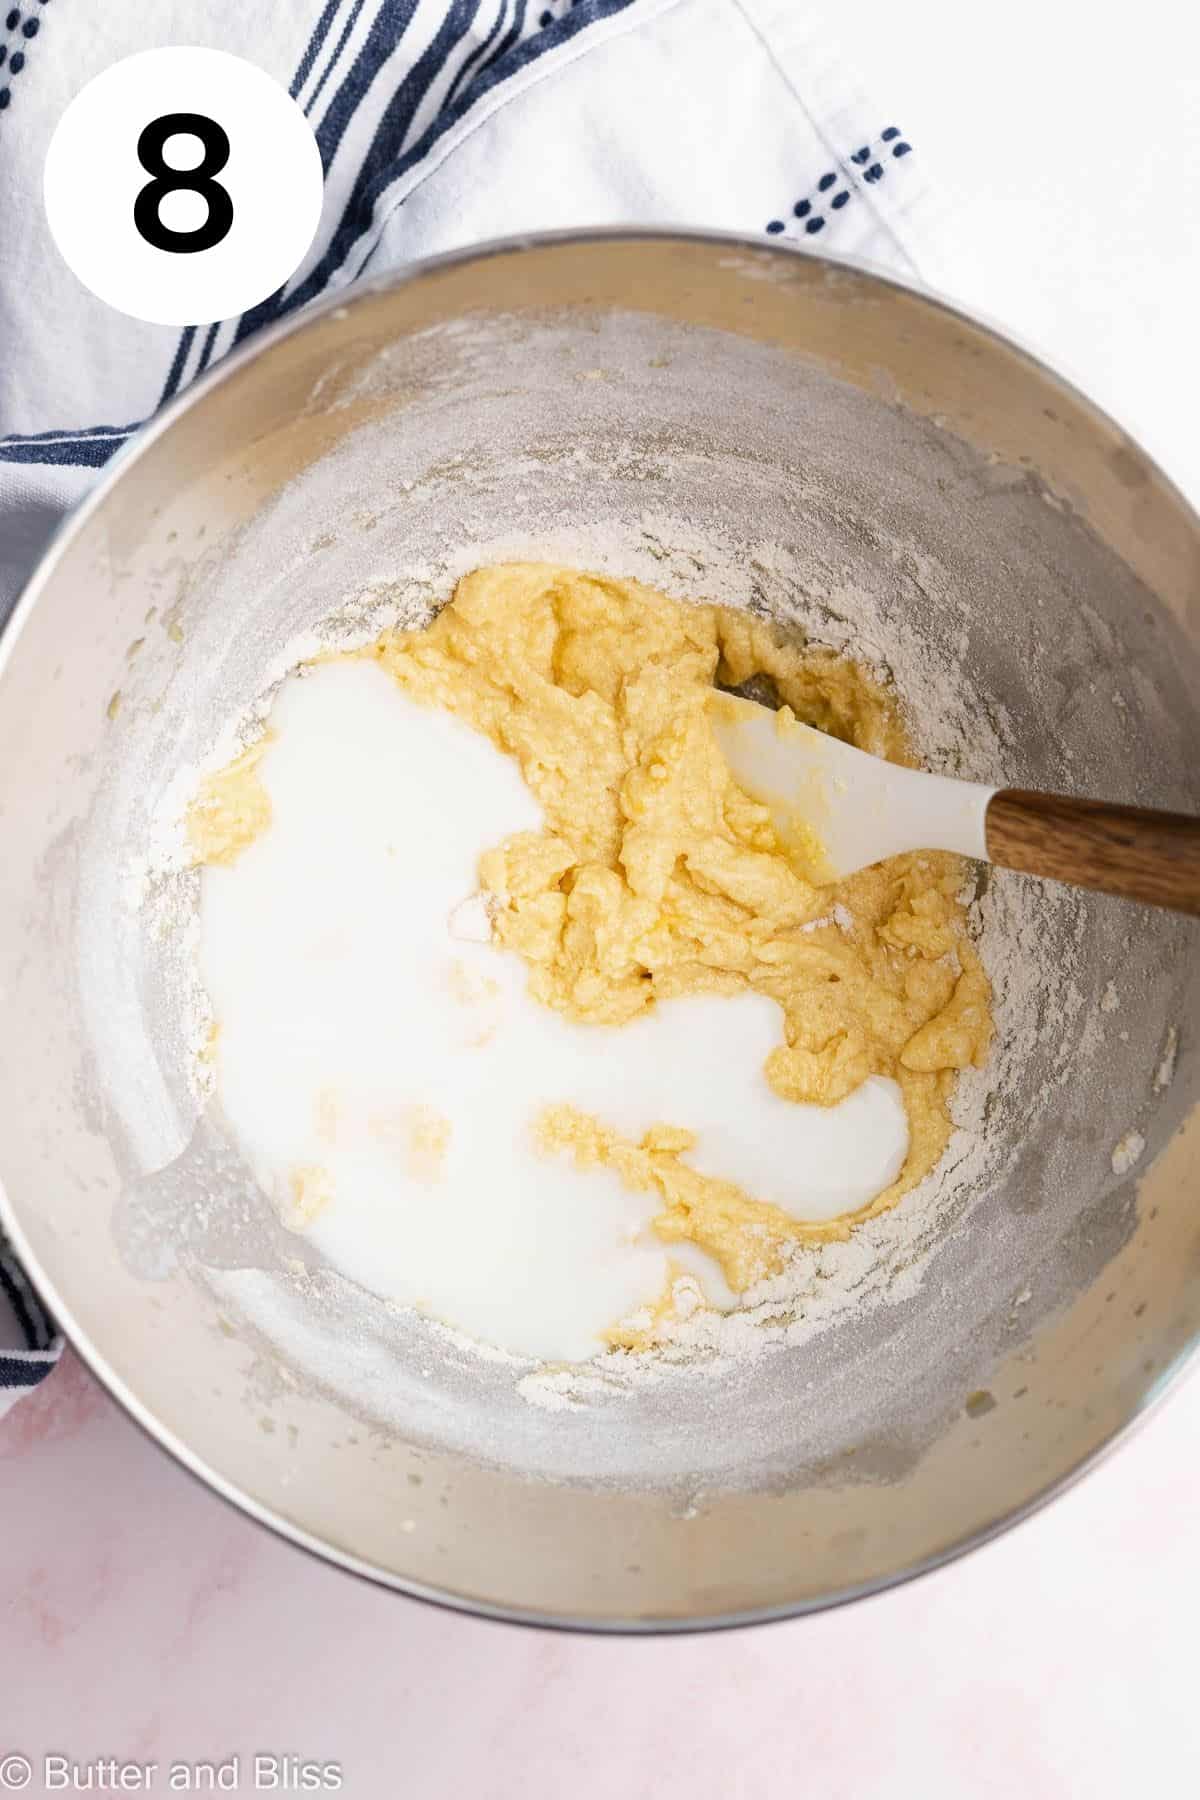 Buttermilk added to an upside down cake batter in a mixing bowl.